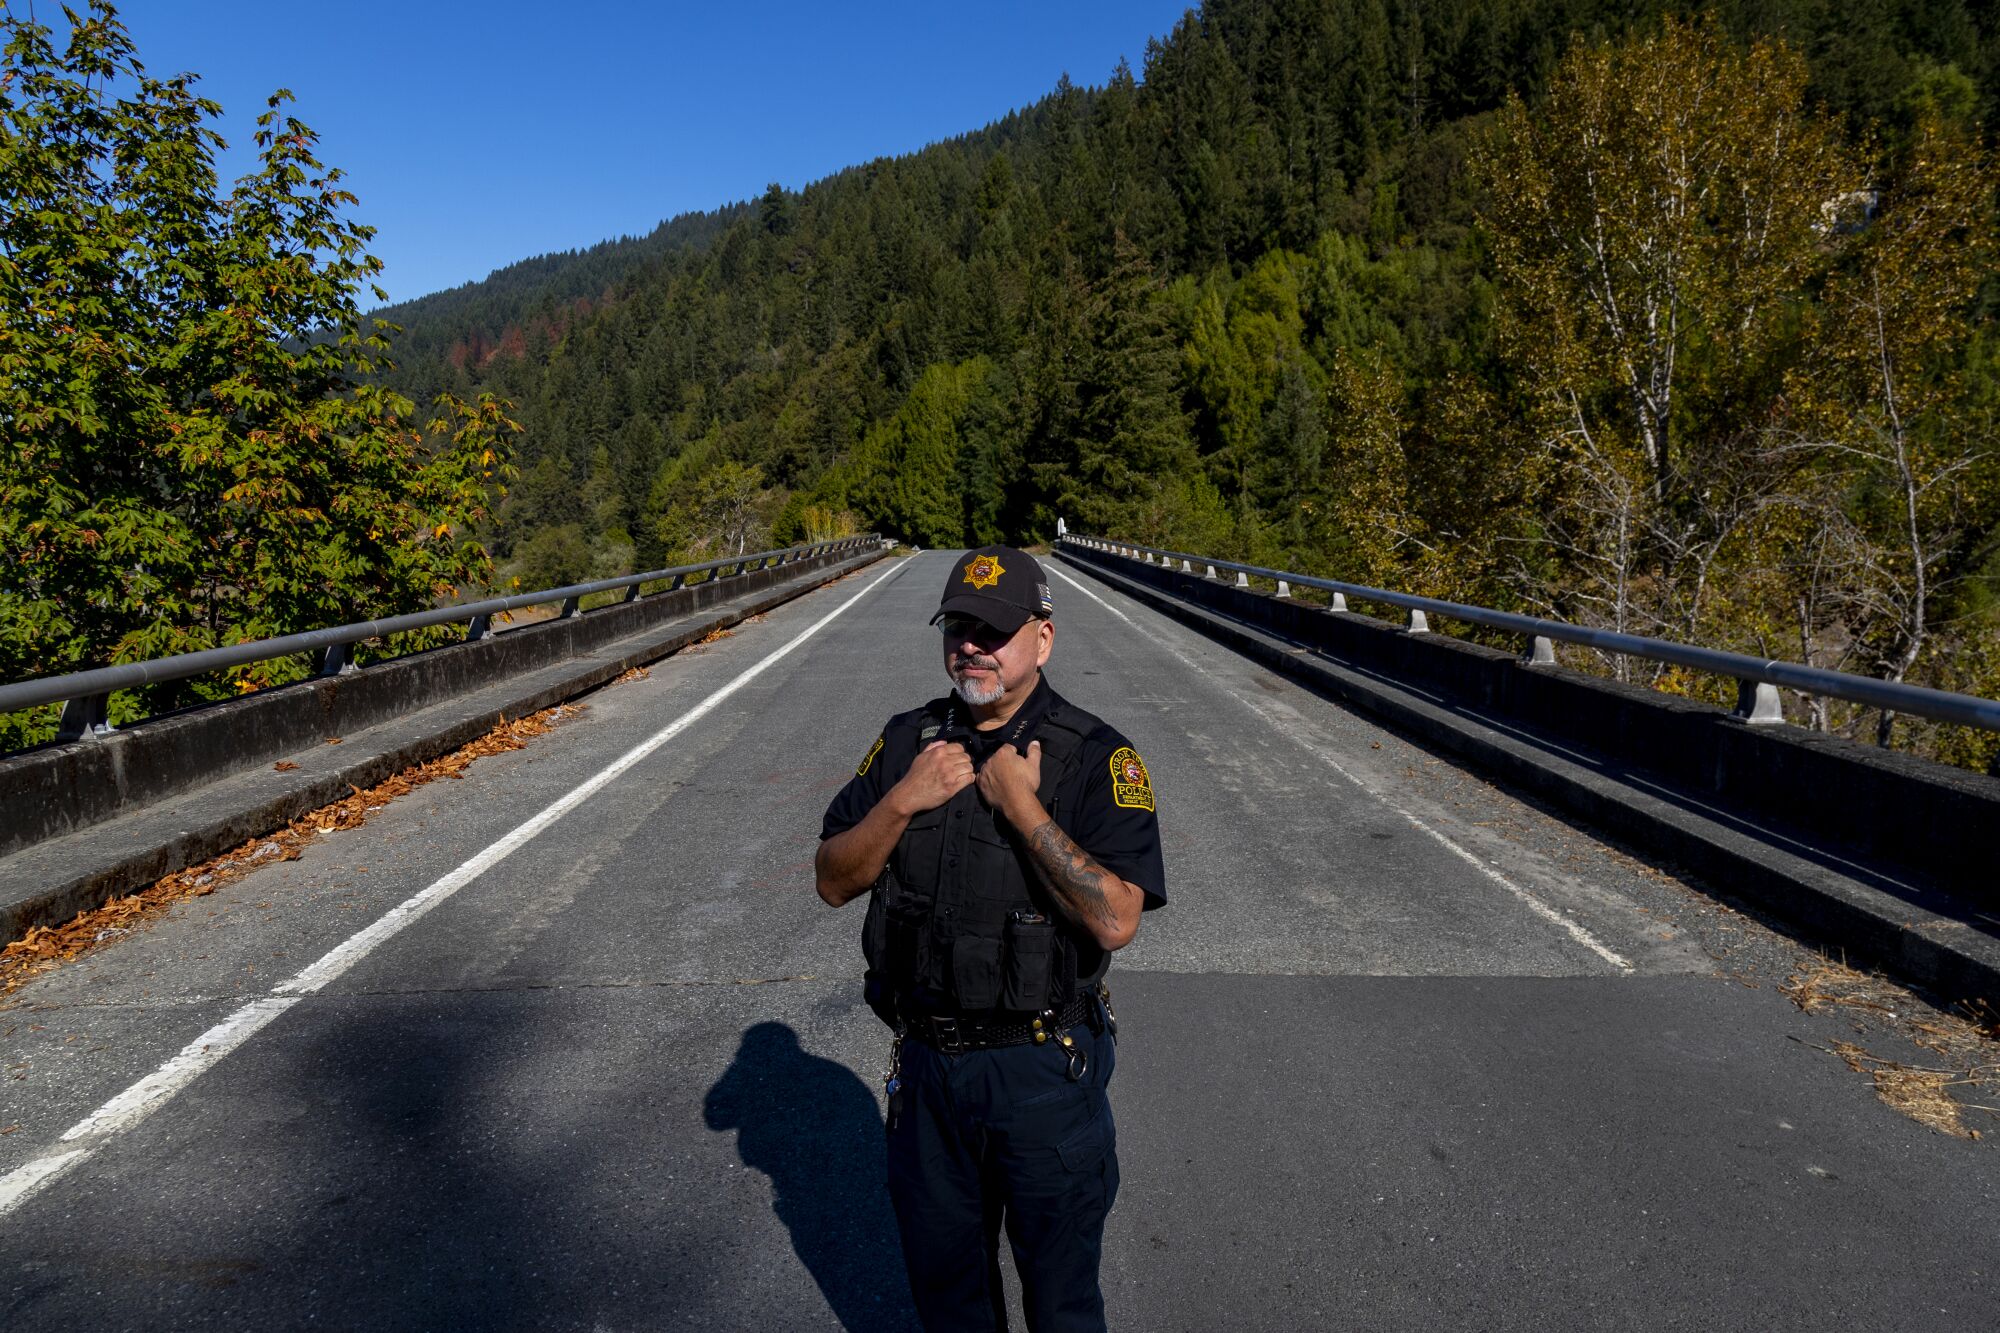 Yurok Tribal Police Chief Greg O'Rourke stands on a roadway bridge surrounded by mostly a pine-tree forest